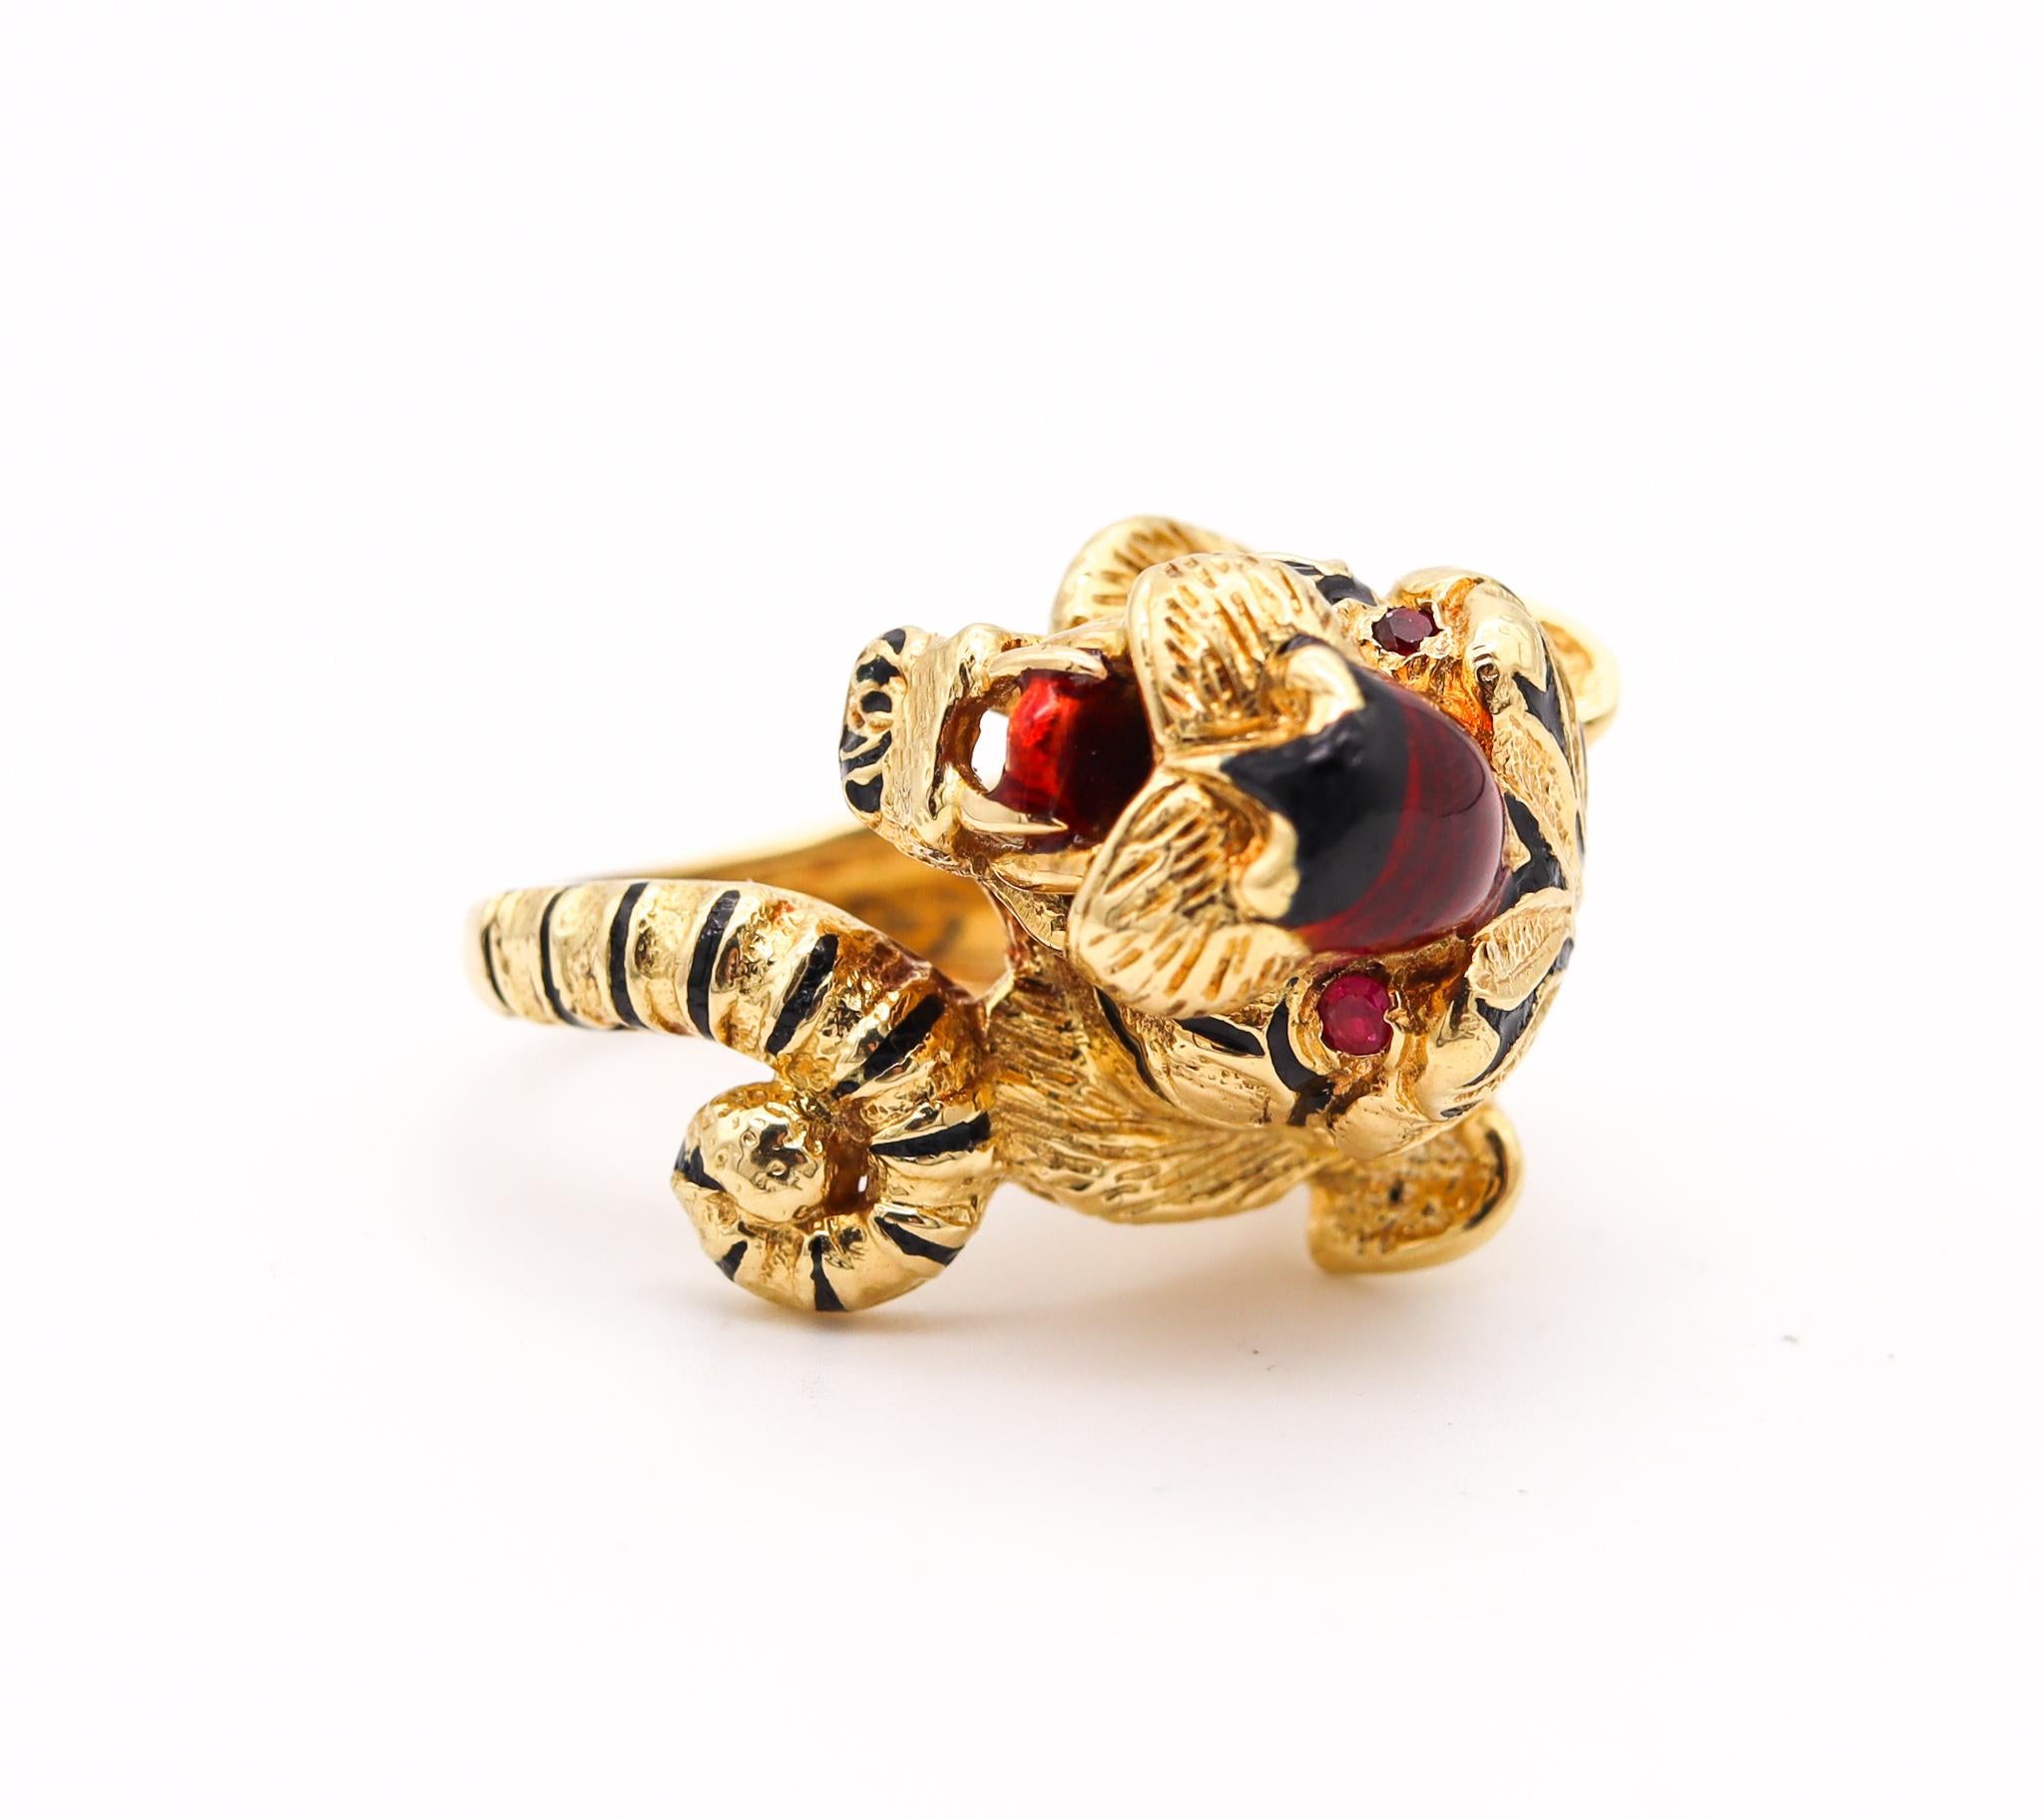 Tiger Cocktail ring designed by Frascarolo.

A beautiful highly sculpted ring from the bestiary collection of the famed Italian jeweler and designer, Pierino Frascarolo. This impressive and intricate piece was crafted during the Mid-Century period,